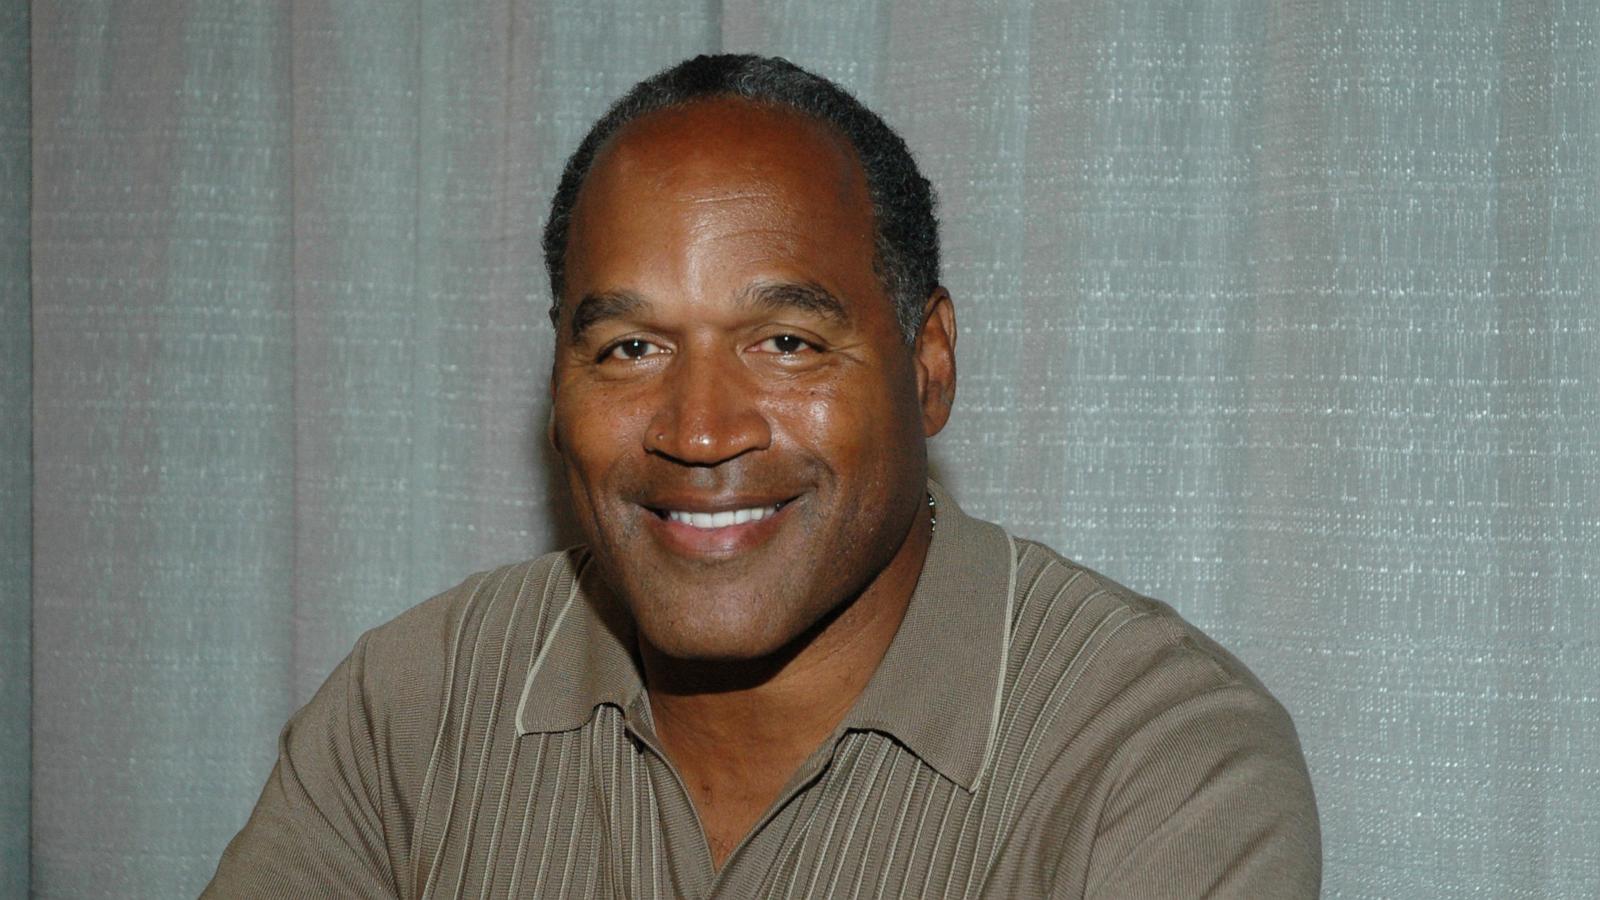 PHOTO: O.J. Simpson at the Expo Center Edison in Edison, N.J., March 31, 2006.